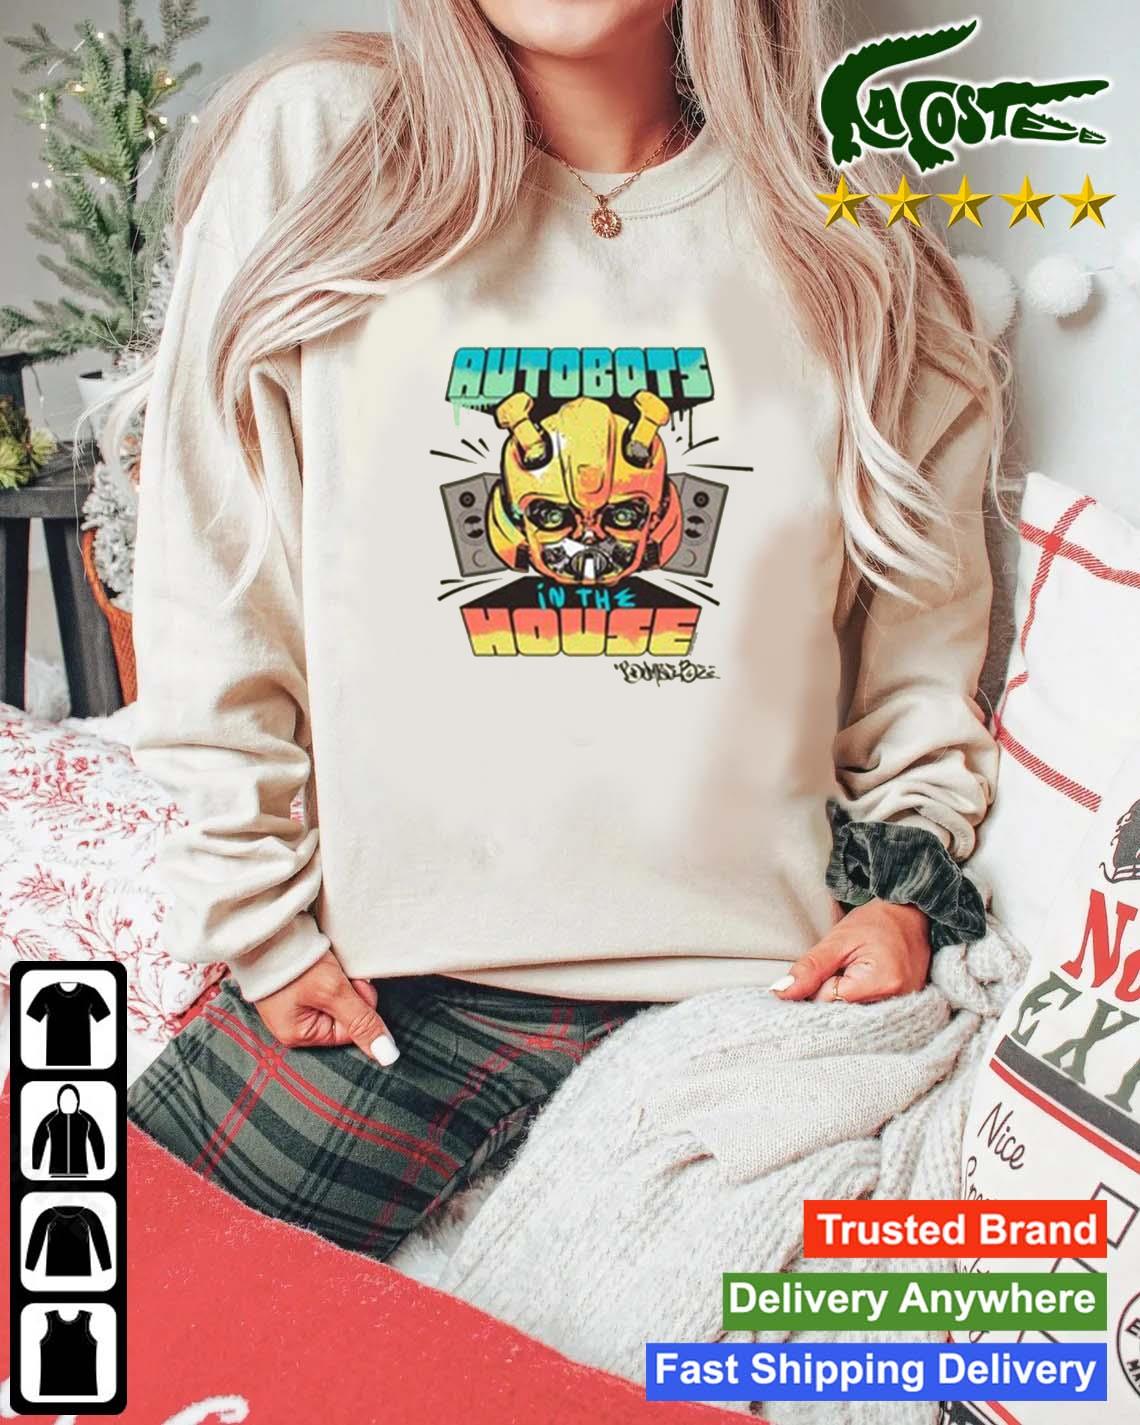 Autobots In The House Transformers Natural Sweats Mockup Sweater